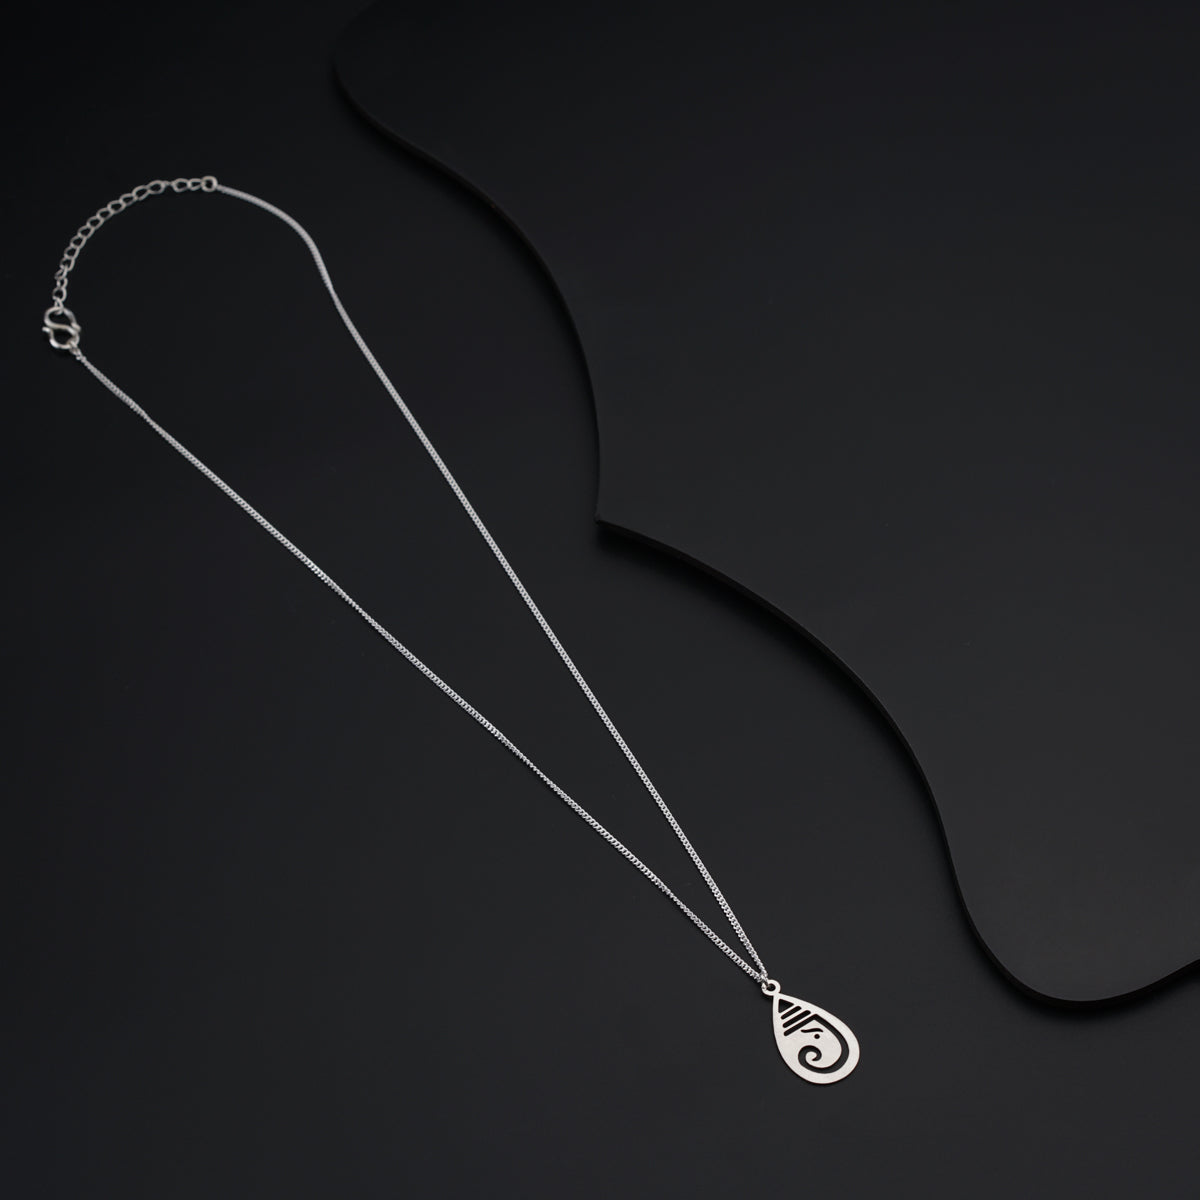 a necklace with a spiral design on a black background